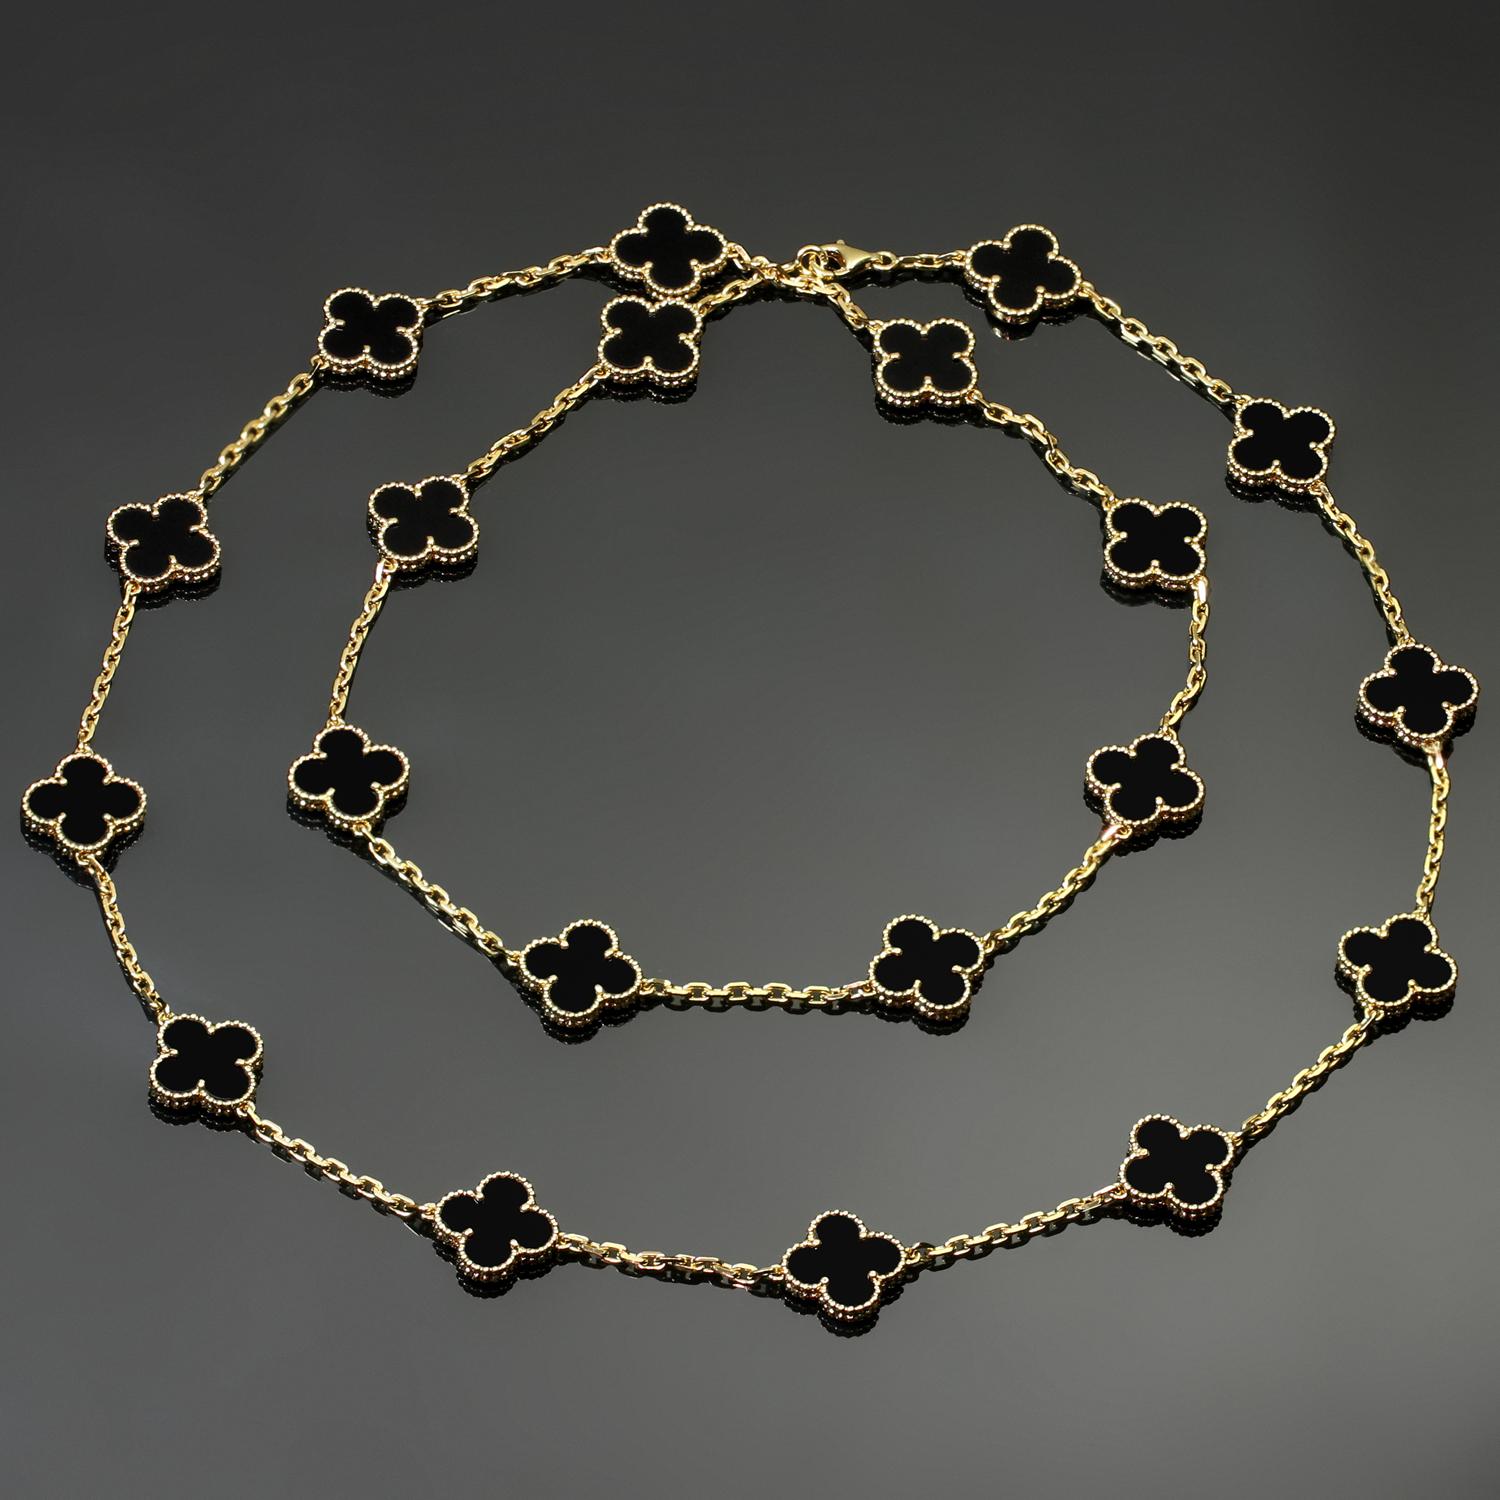 This classic long Van Cleef & Arpels necklace from the iconic Vintage Alhambra collection is crafted in 18k yellow gold and features 20 lucky clover motifs beautifully inlaid with black onyx in round bead settings. Made in France circa 2012.